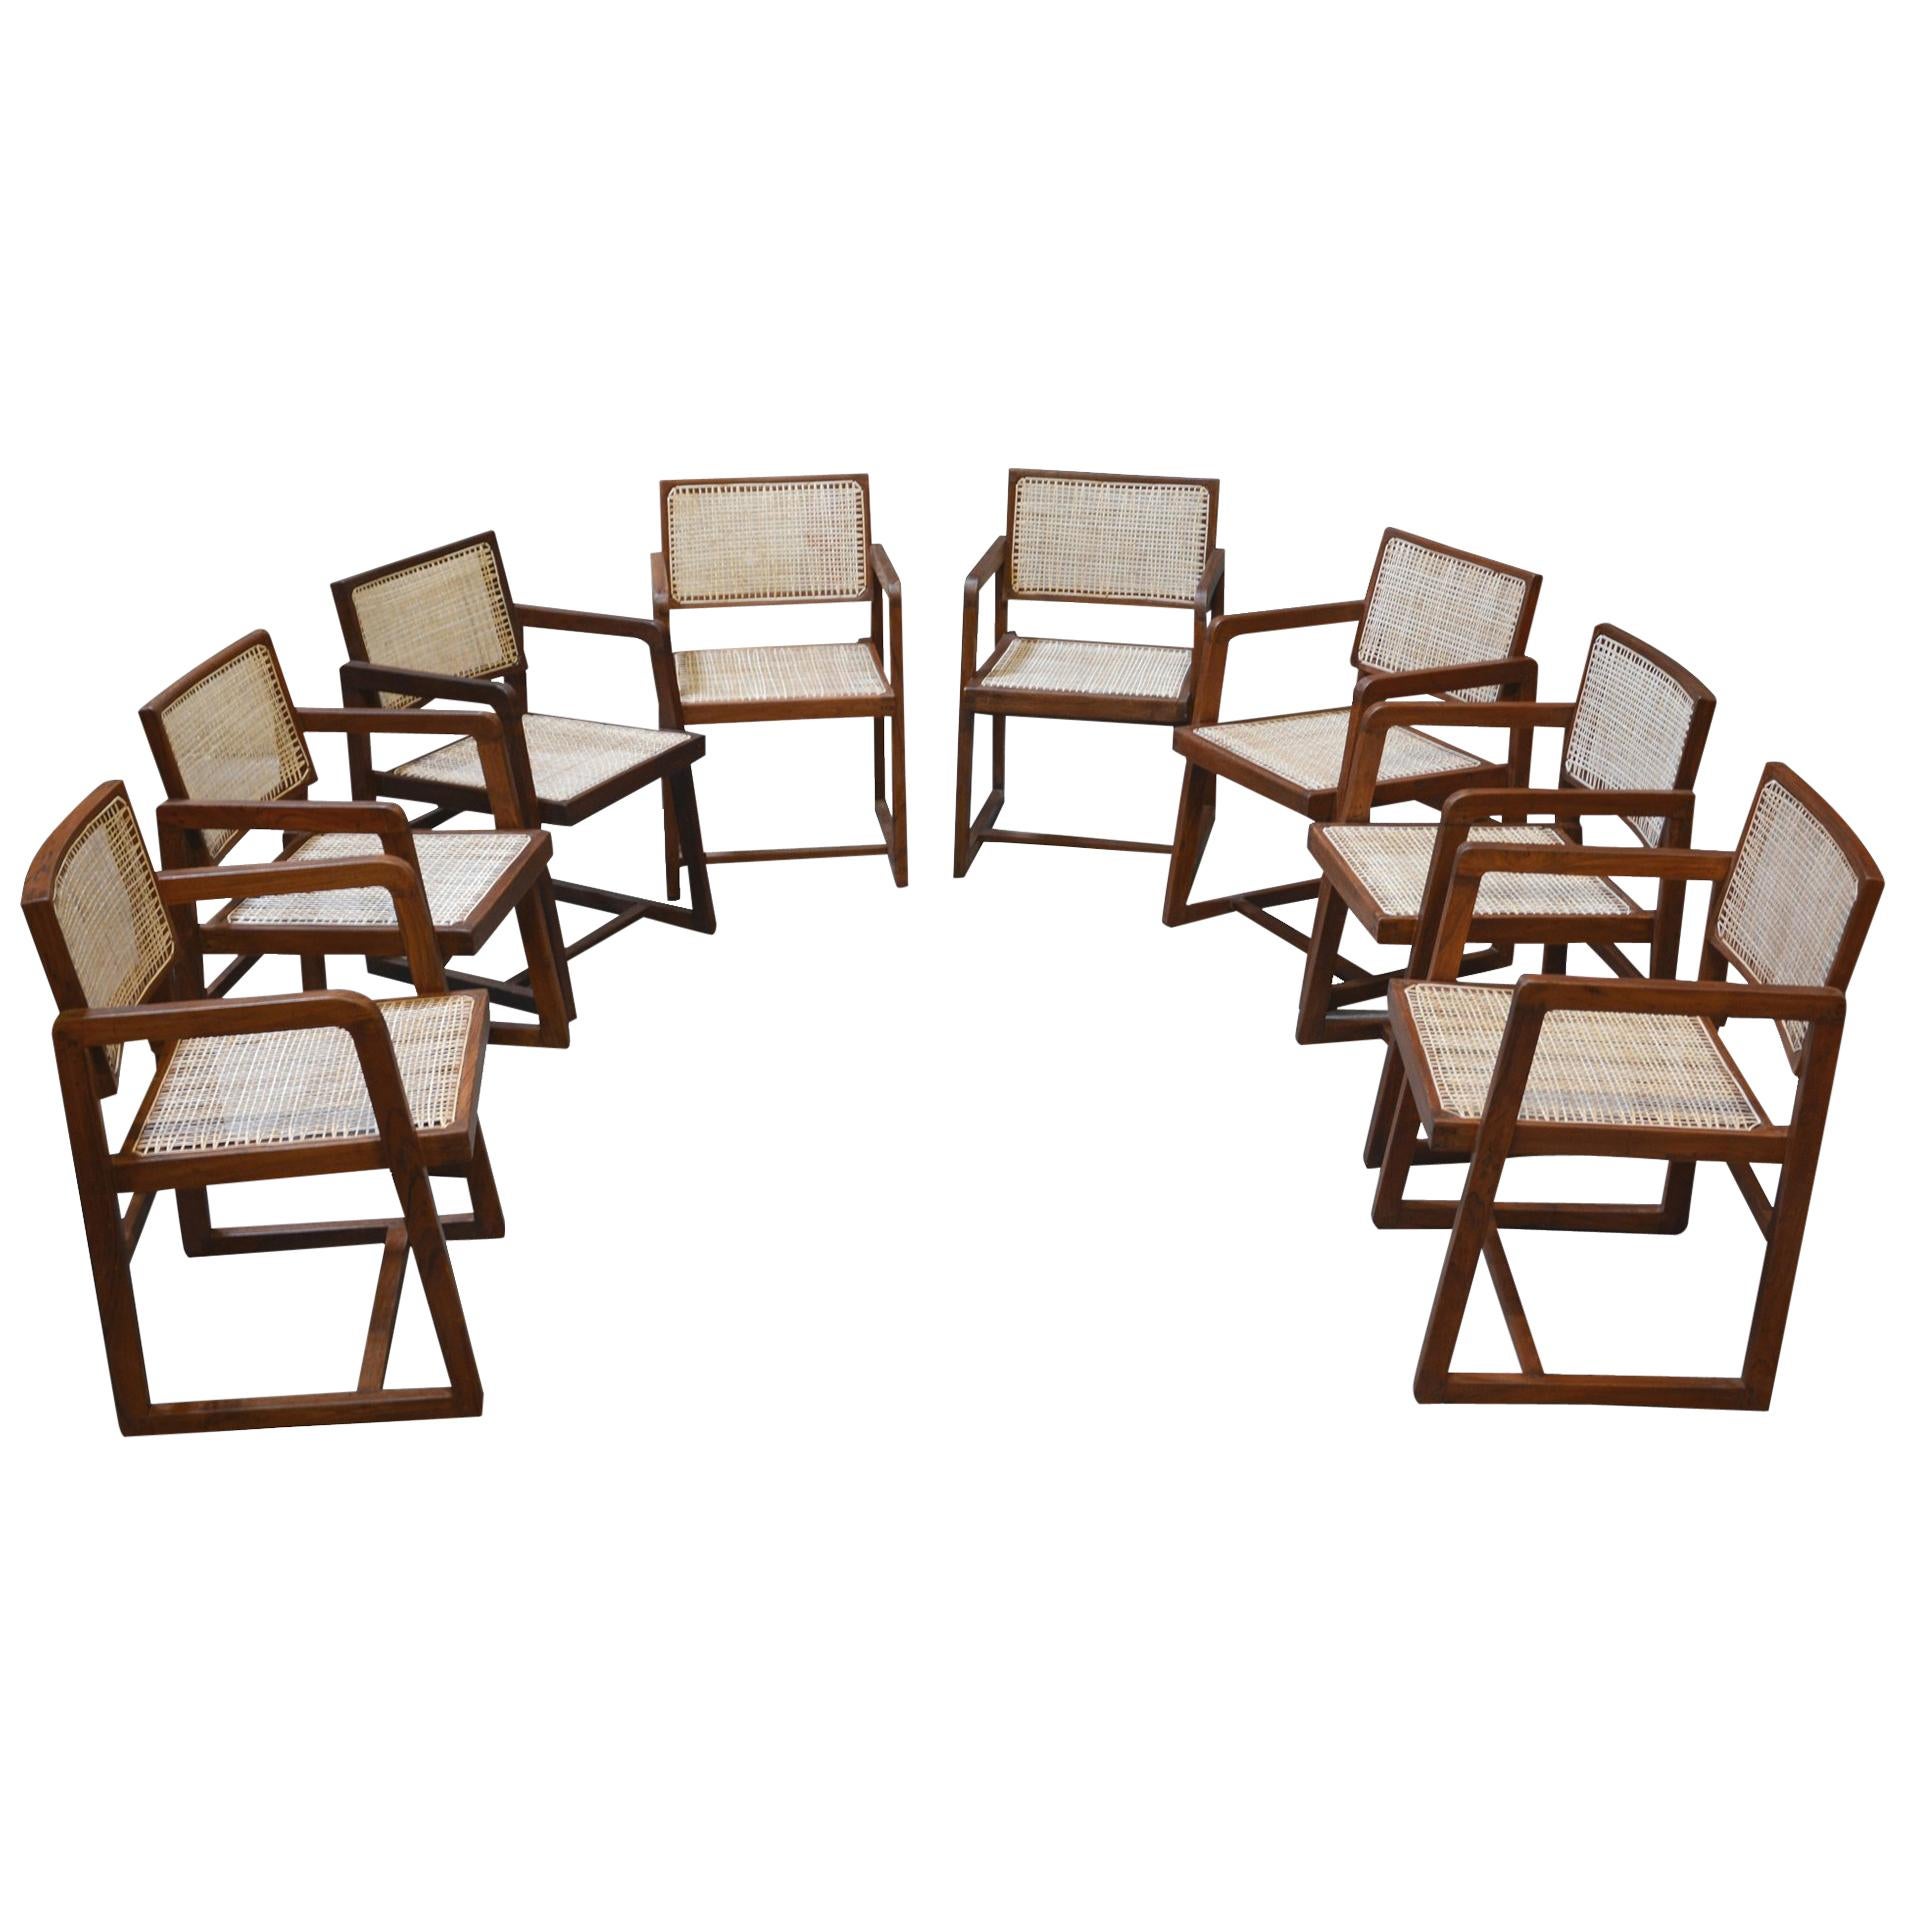 Pierre Jeanneret Rare Set of 8 Cane Back Office Chairs with Original Letterings For Sale